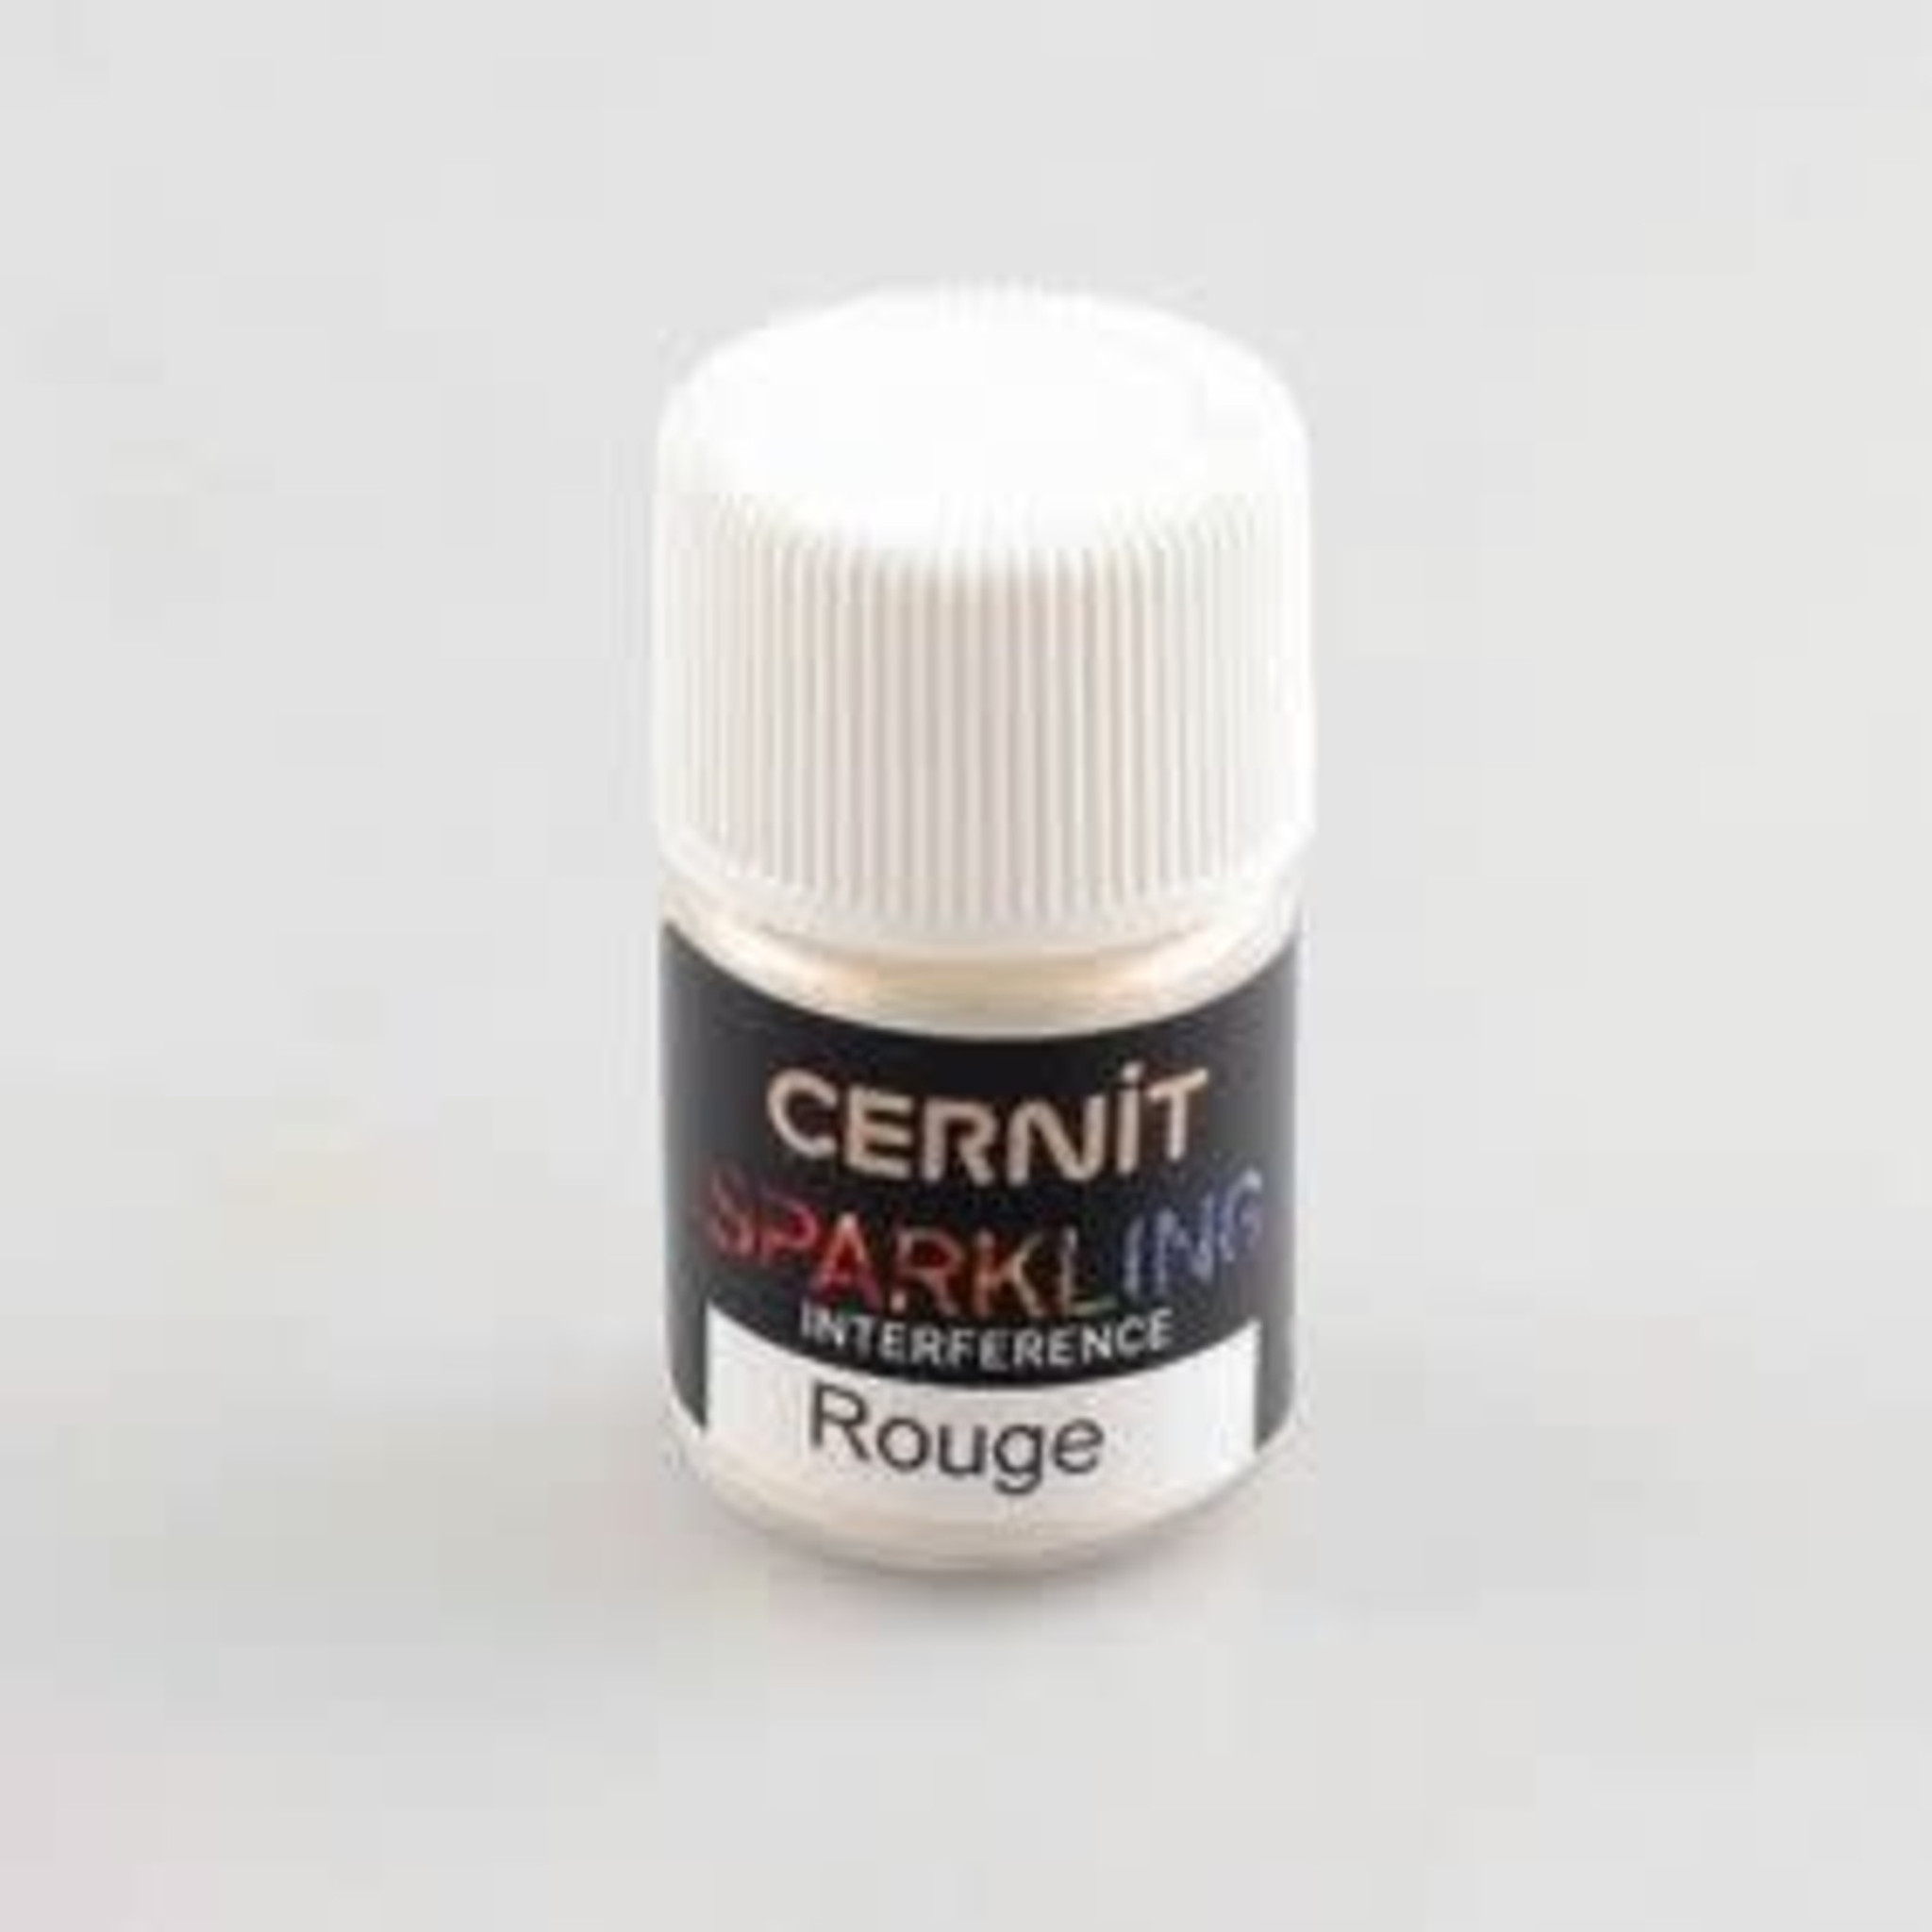 Cernit Translucent Glitter White - Poly Clay Play